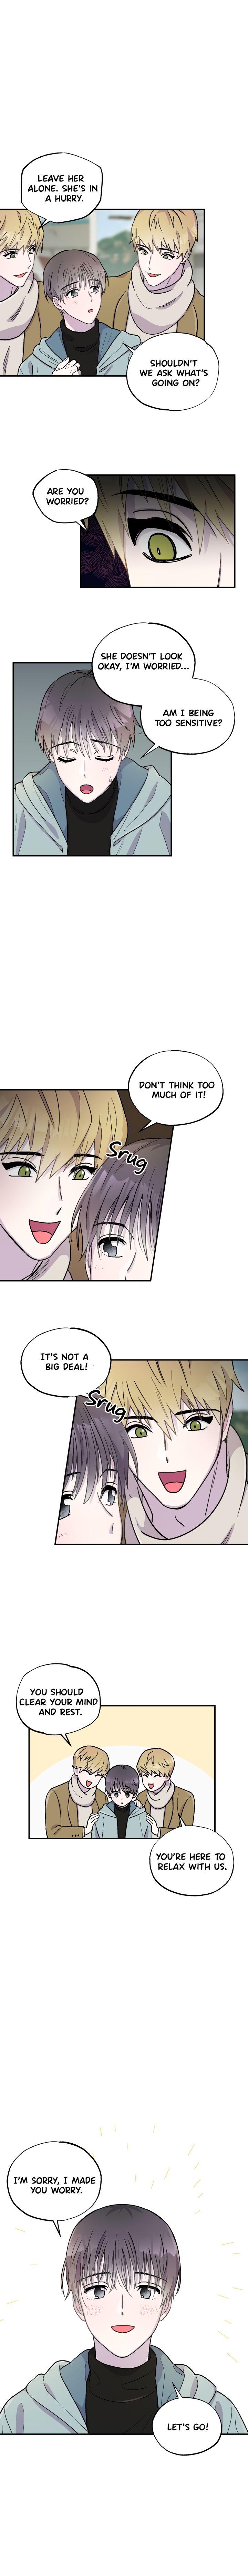 The twins and me manhwa